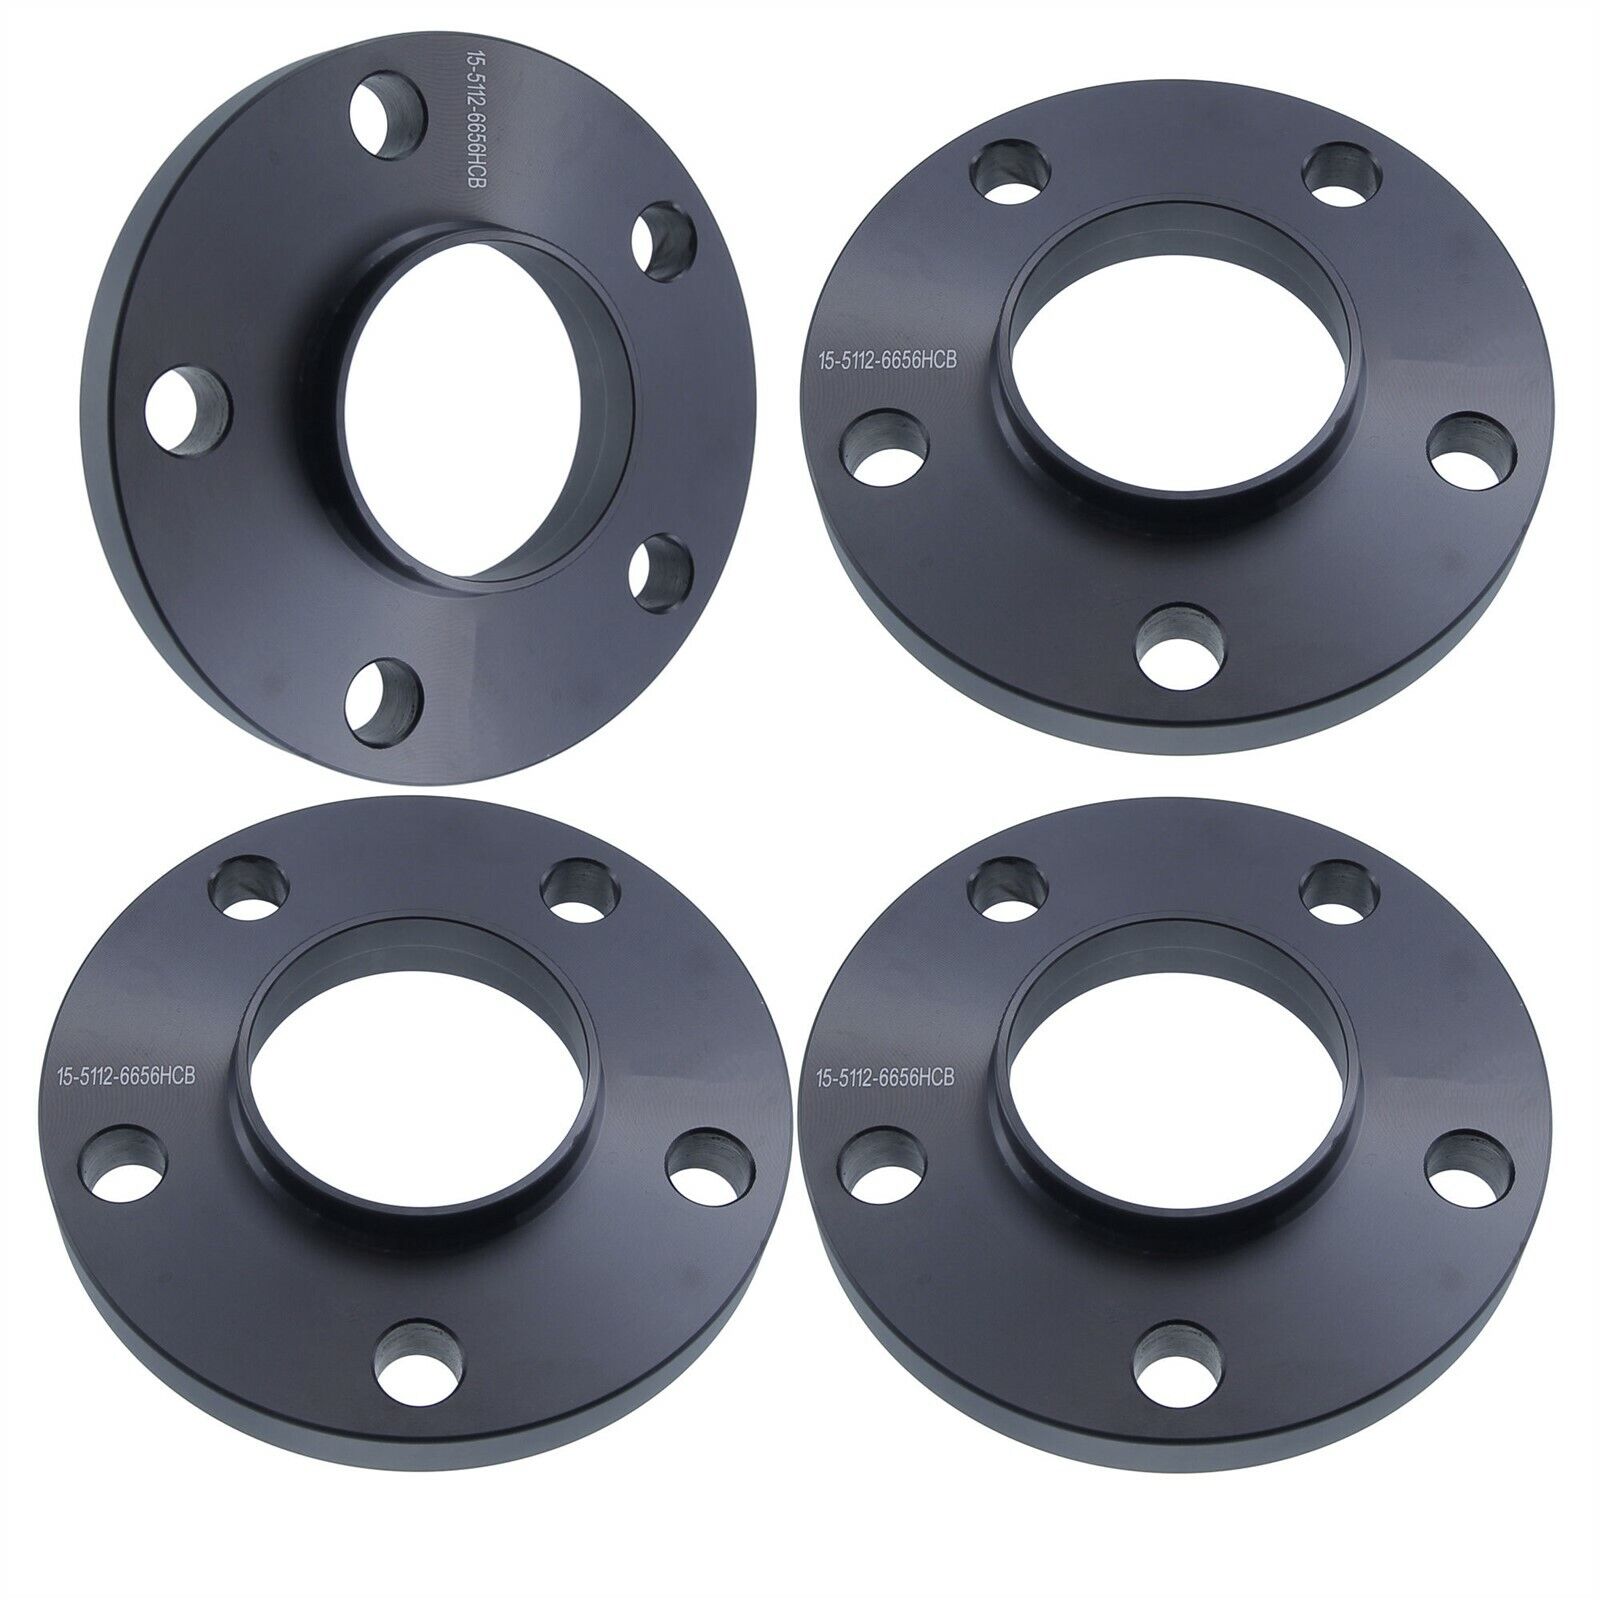 4x 15mm Hubcentric Wheel Spacers 5x112 fits Audi S5 RS5 A7 A5 A4 A6 A7 RS7 S4 Q5